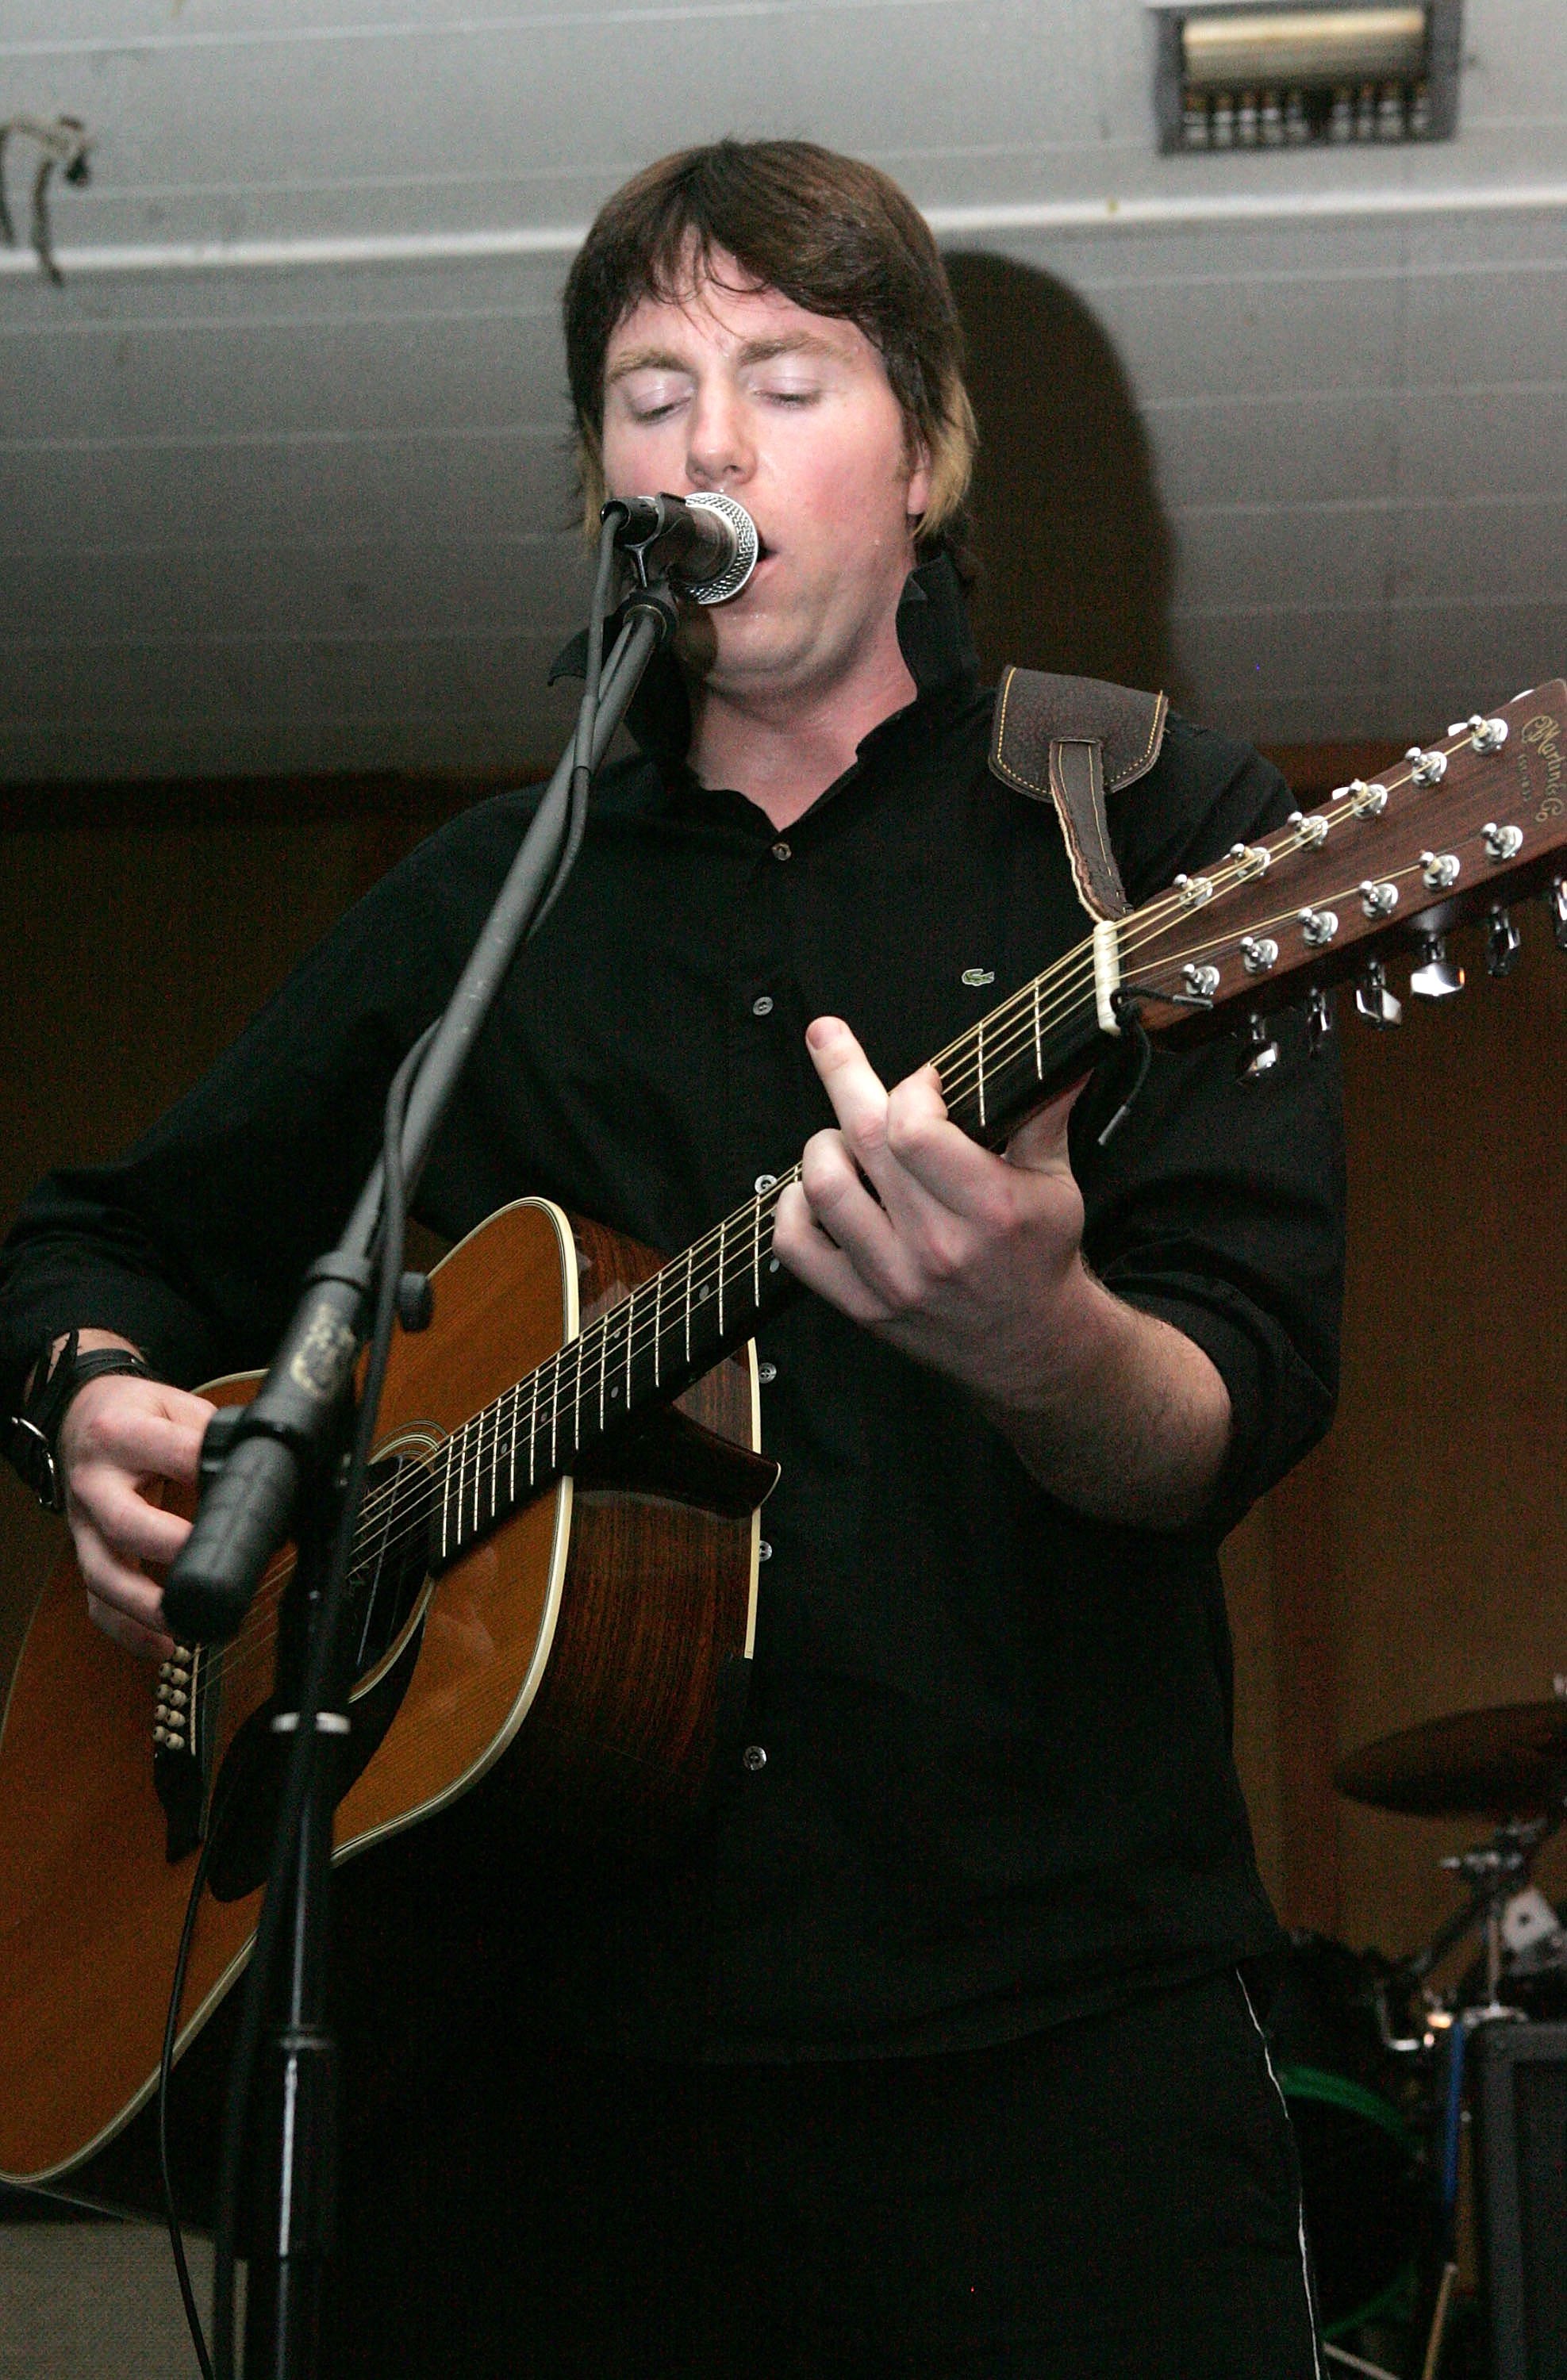 Elijah Blue Allman of Deadsy performs onstage at the Deadsy Private Showcase at Cole Avenue Studios in Los Angeles, California on October 17, 2006. | Source: Getty Images